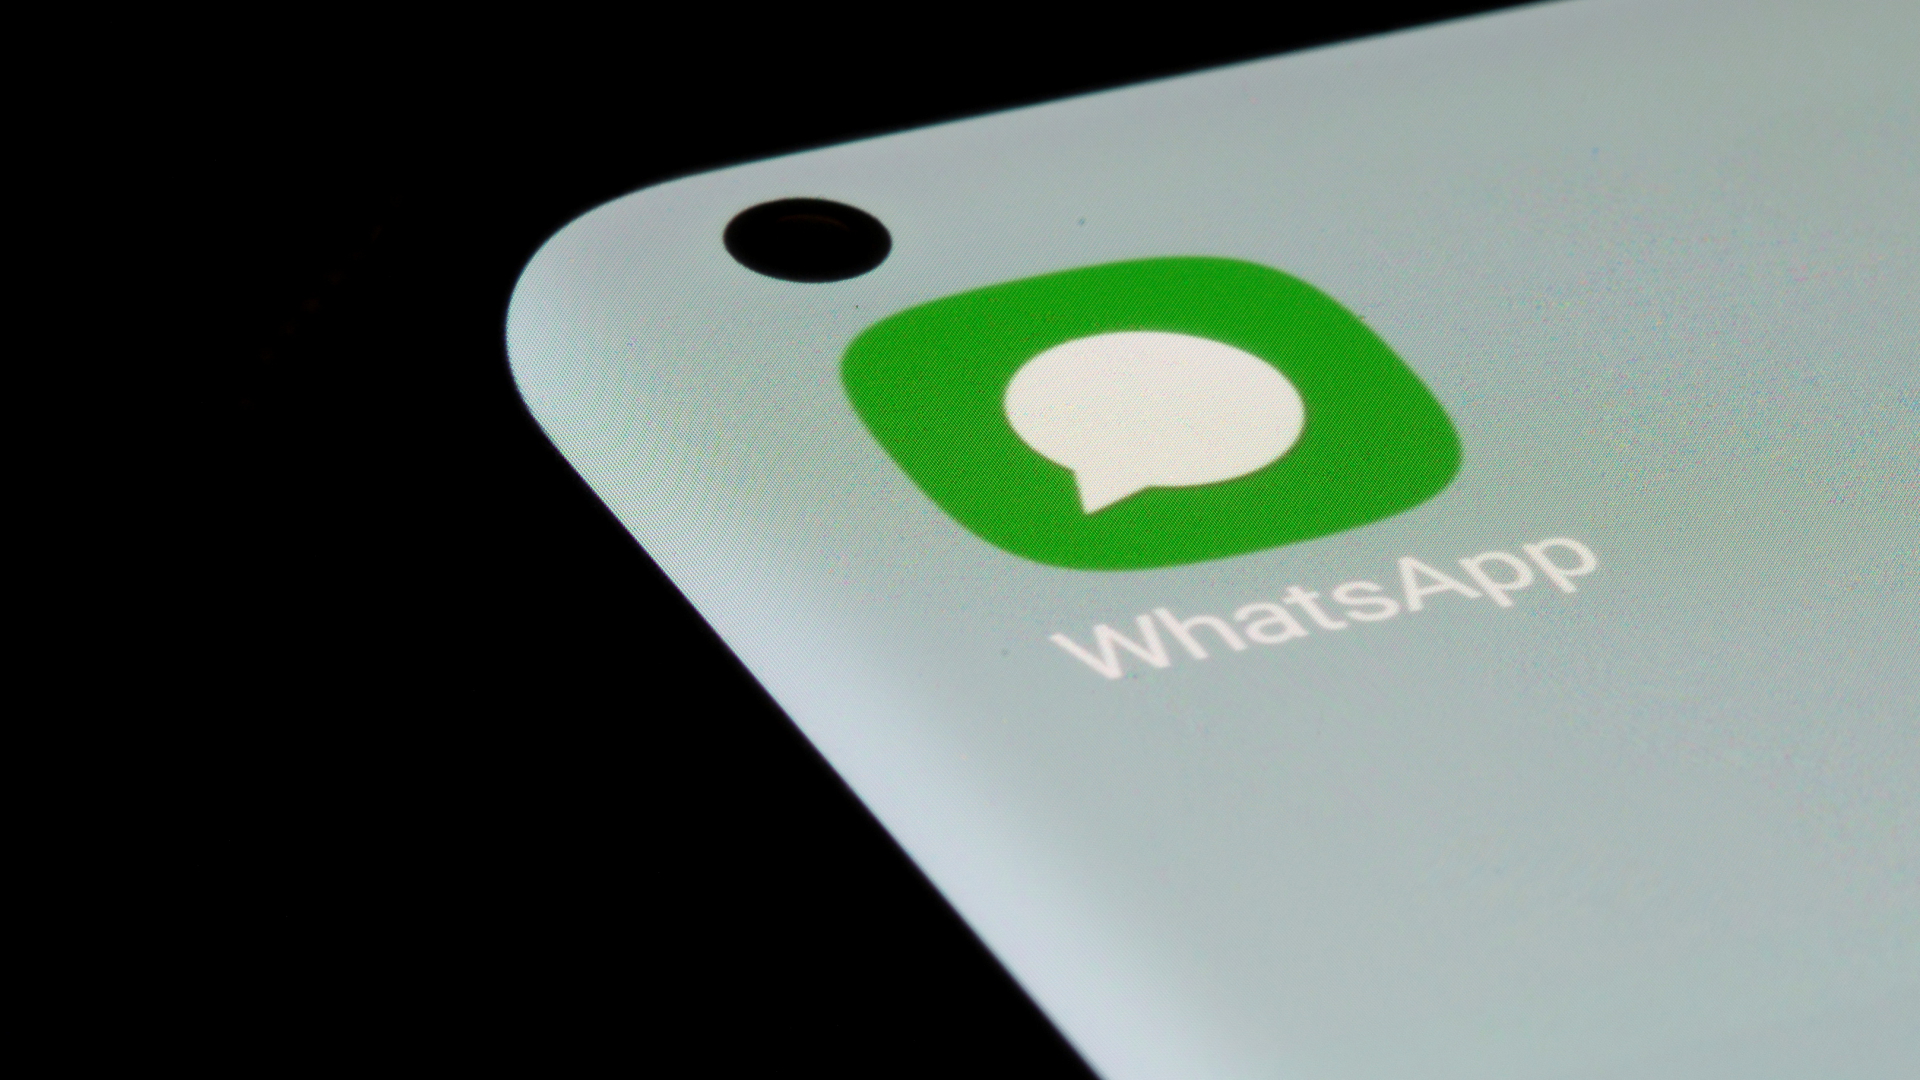 Irish Data Protection Authority: File a fine against WhatsApp

